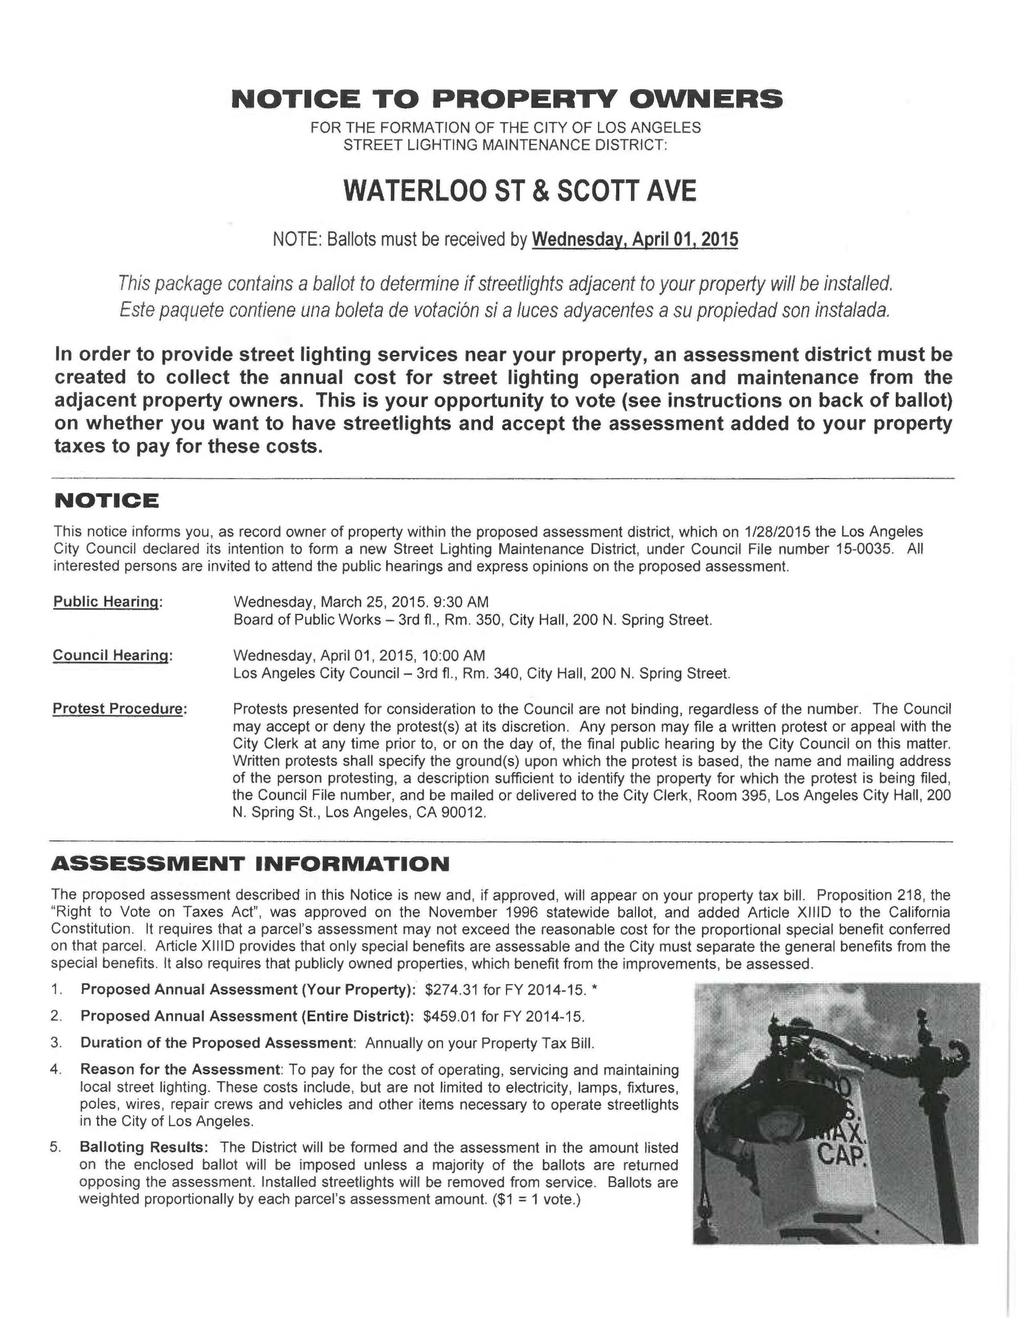 NOTICE TO PROPERTY OWNERS FOR THE FORMATION OF THE CITY OF LOS ANGELES STREET LIGHTING MAINTENANCE DISTRICT: WATERLOO ST & SCOTT AVE NOTE: Ballots must be received by Wednesday, April 01, 2015 This